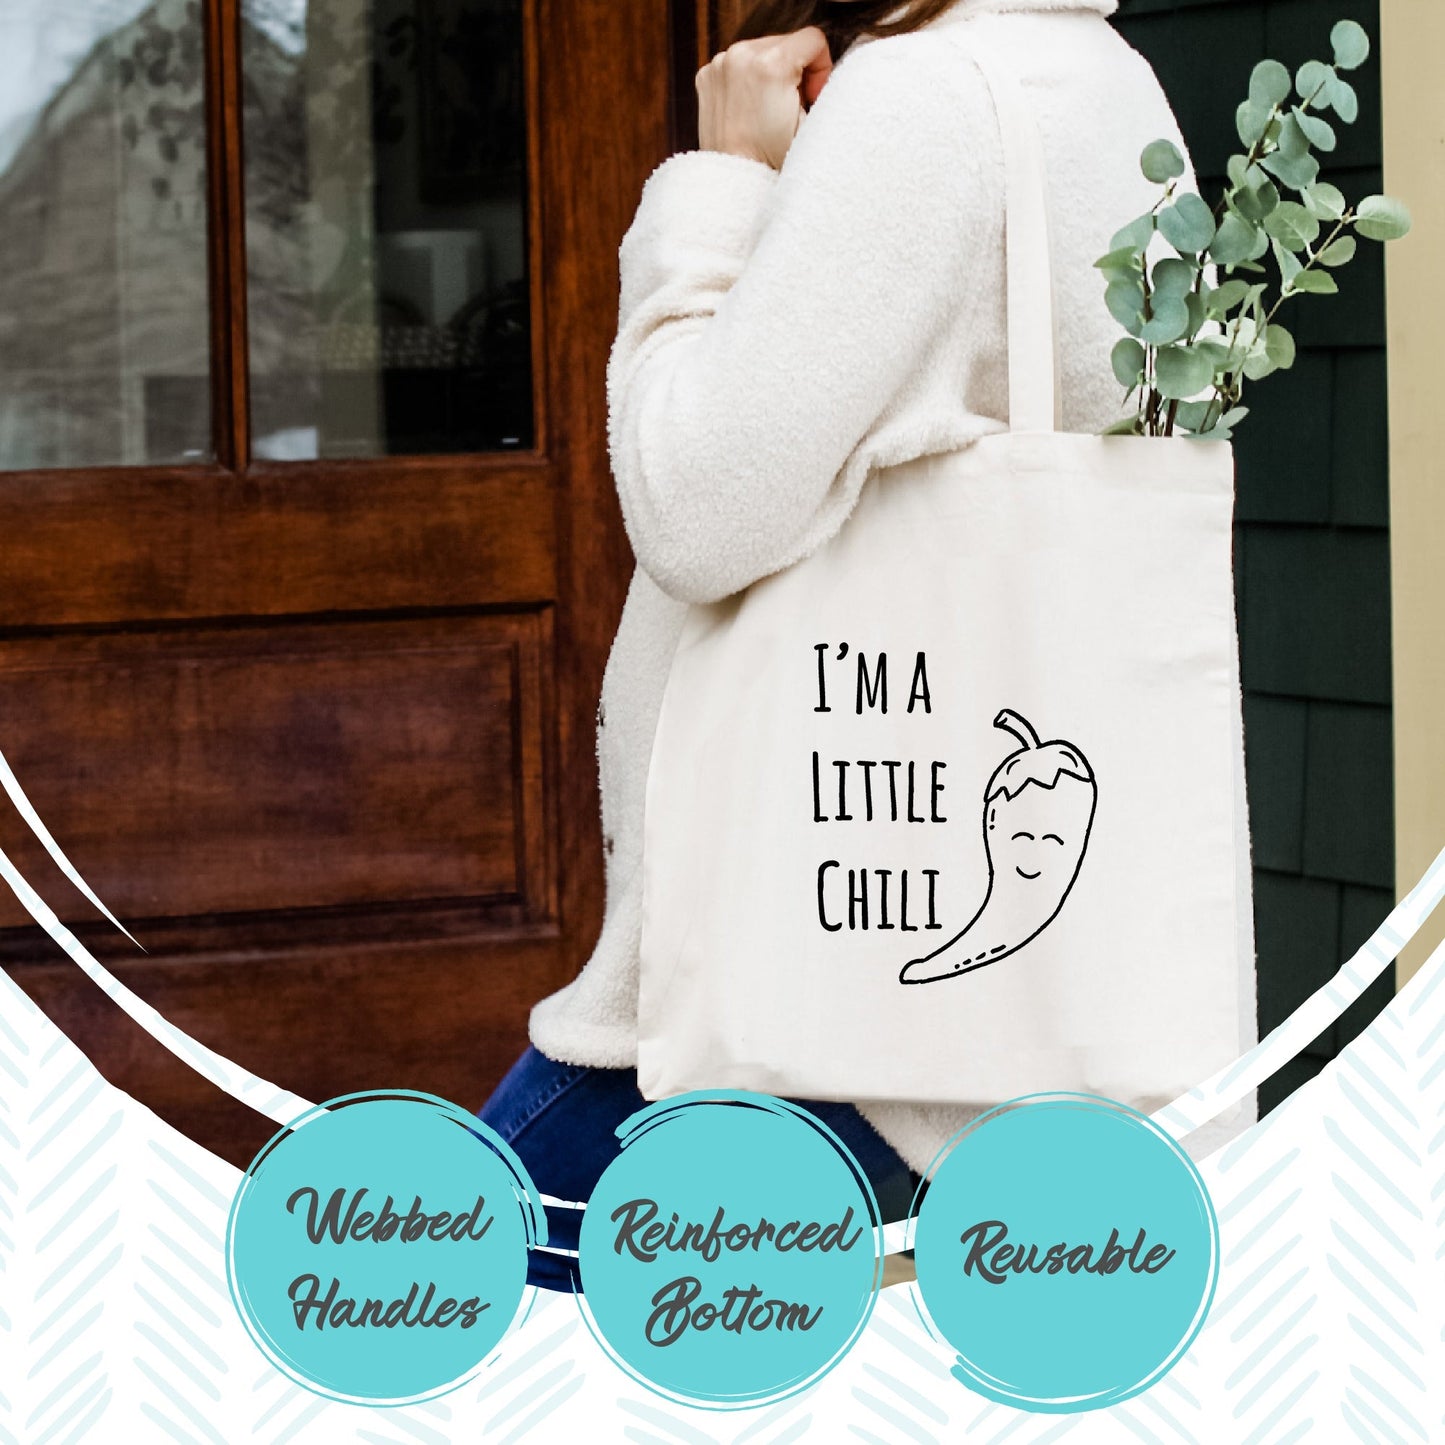 You Are The Apple Of My Pie - Tote Bag - MoonlightMakers